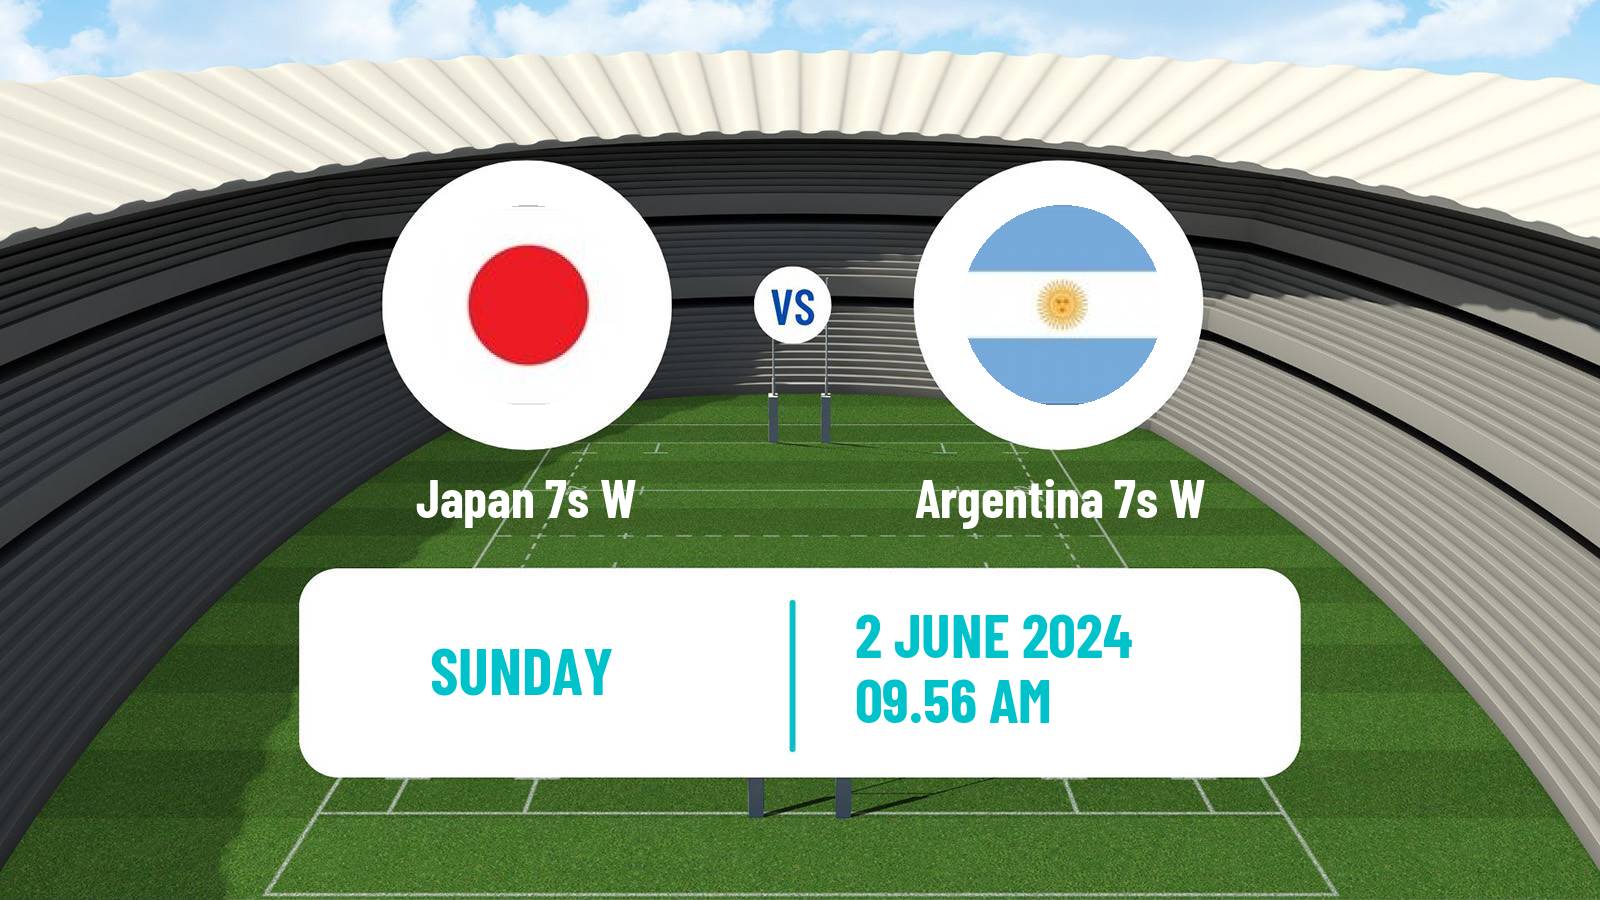 Rugby union Sevens World Series Women - Spain Japan 7s W - Argentina 7s W